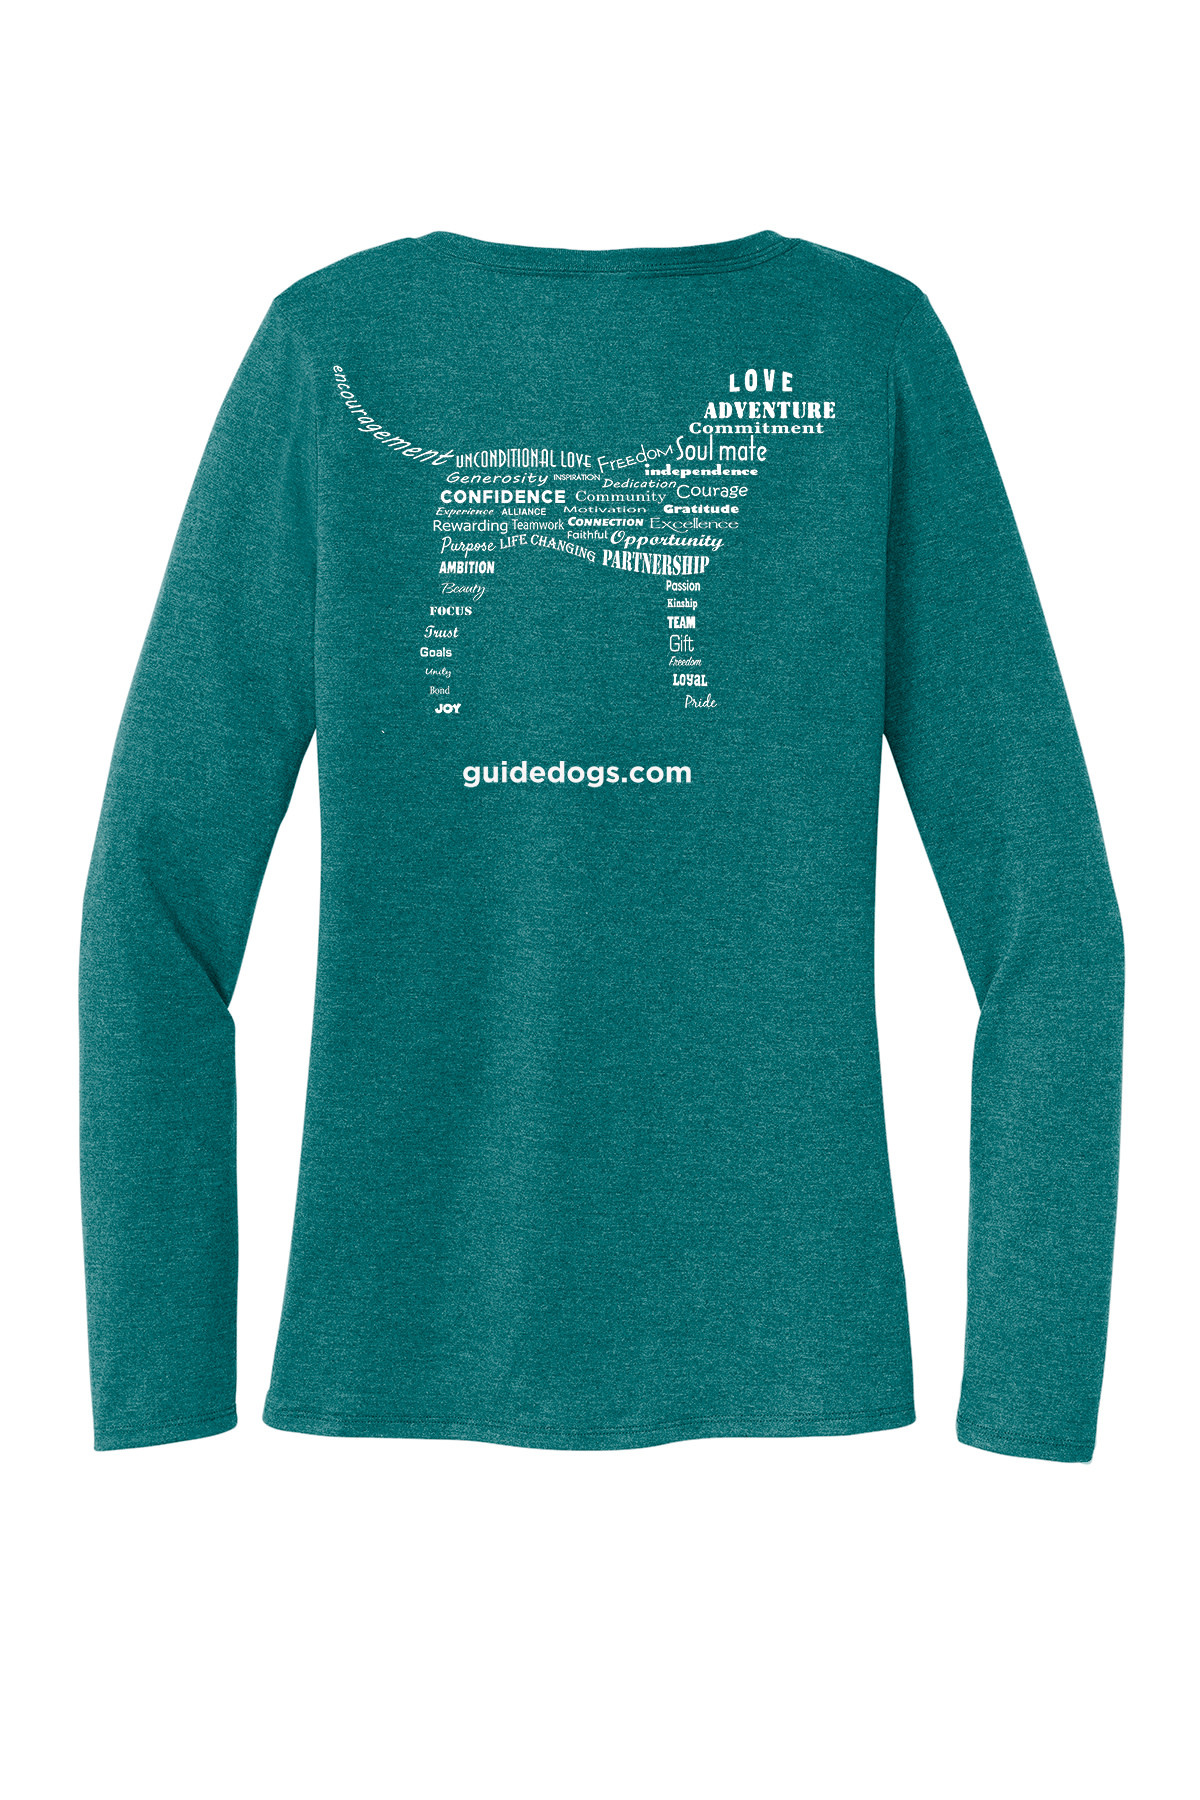 Adult Contoured LS V Neck Wordy Tee - Guide Dogs for the Blind